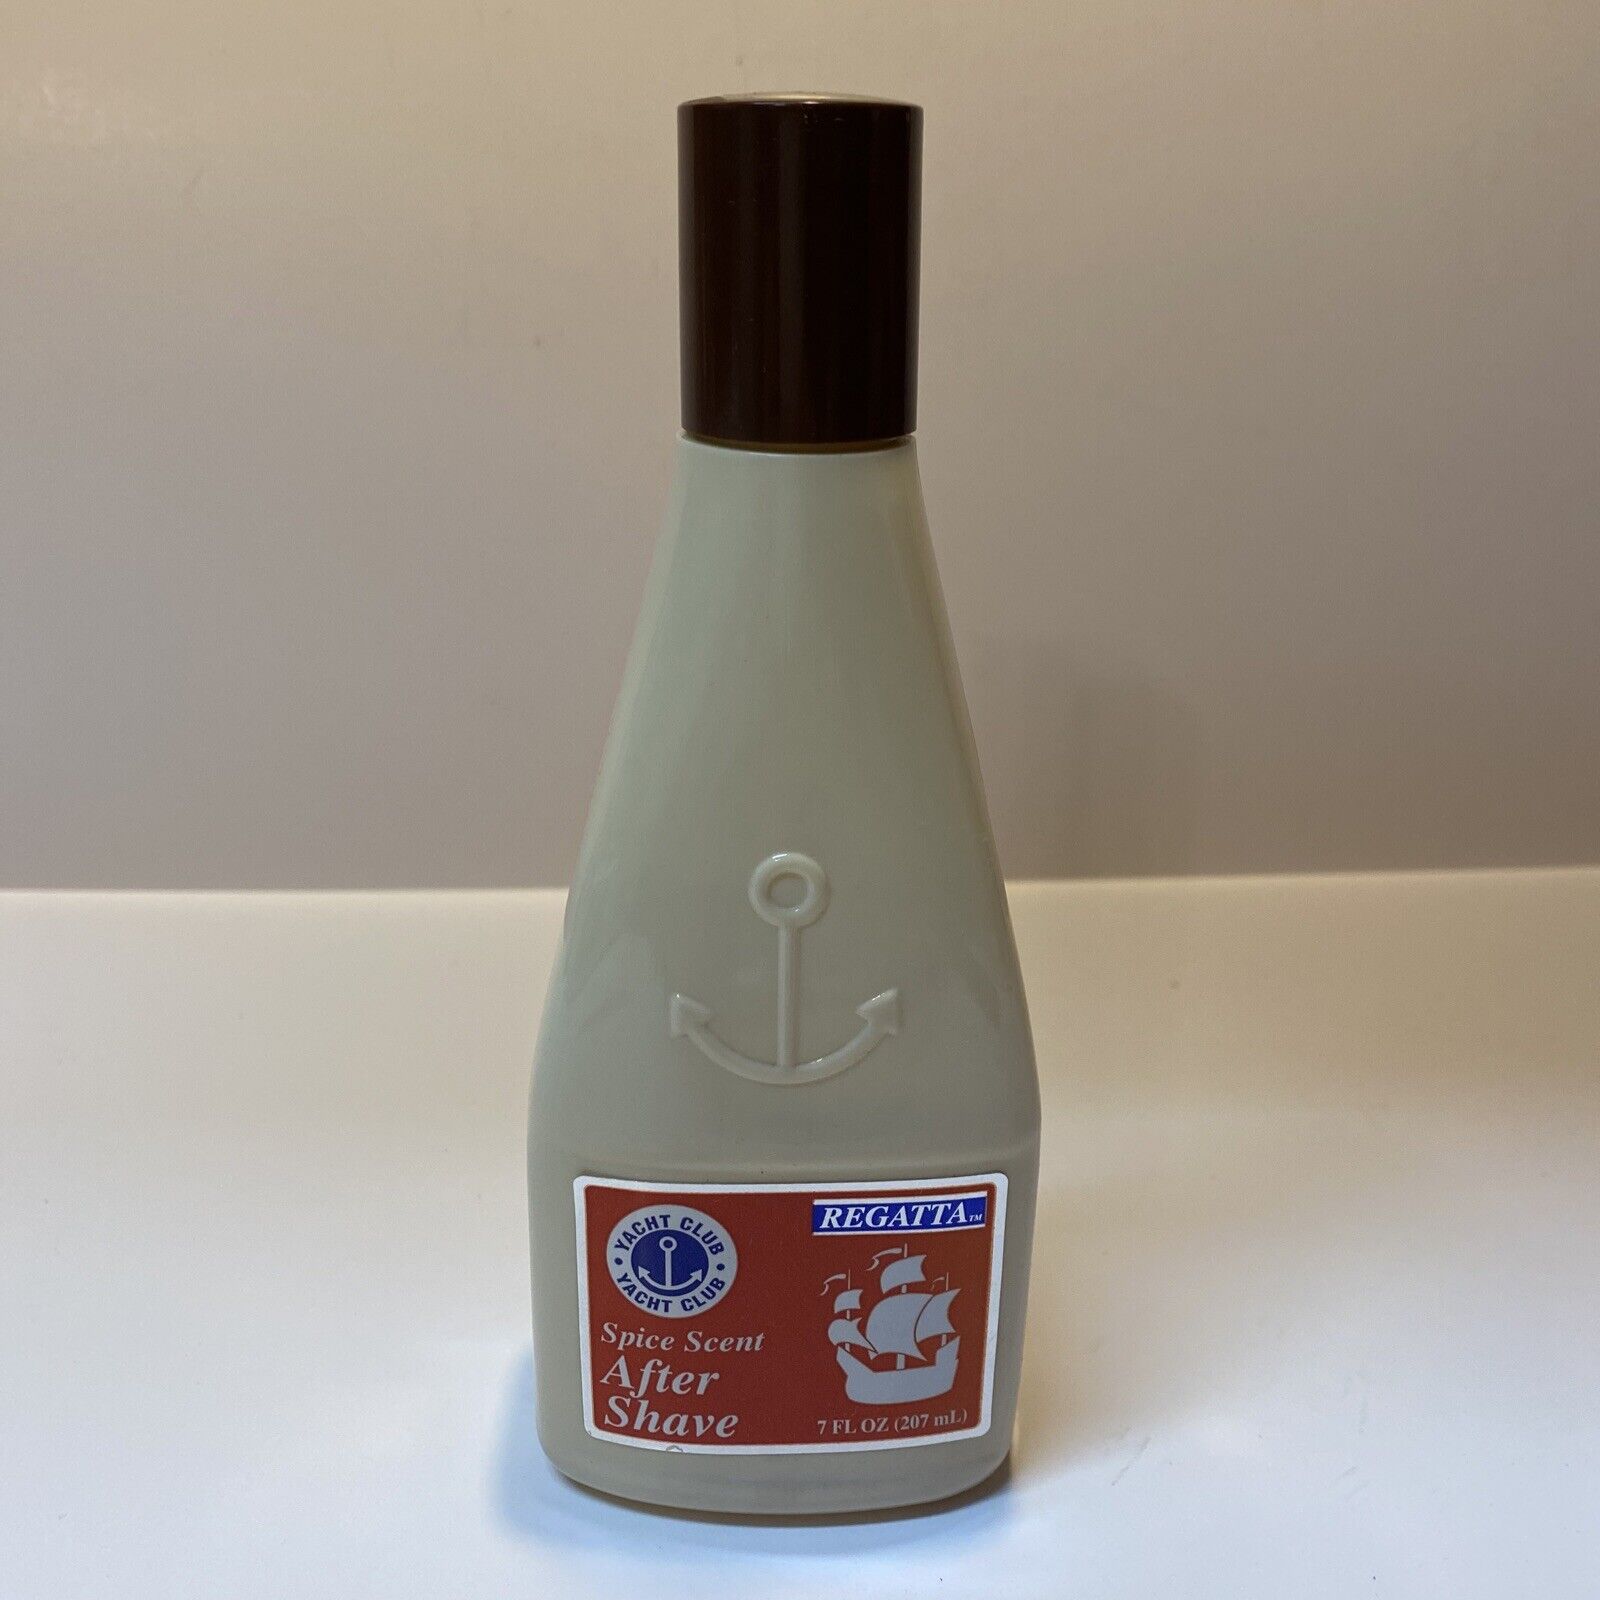 Yacht Club After Shave - Spice Scent By Regatta 7 Fl. Oz.